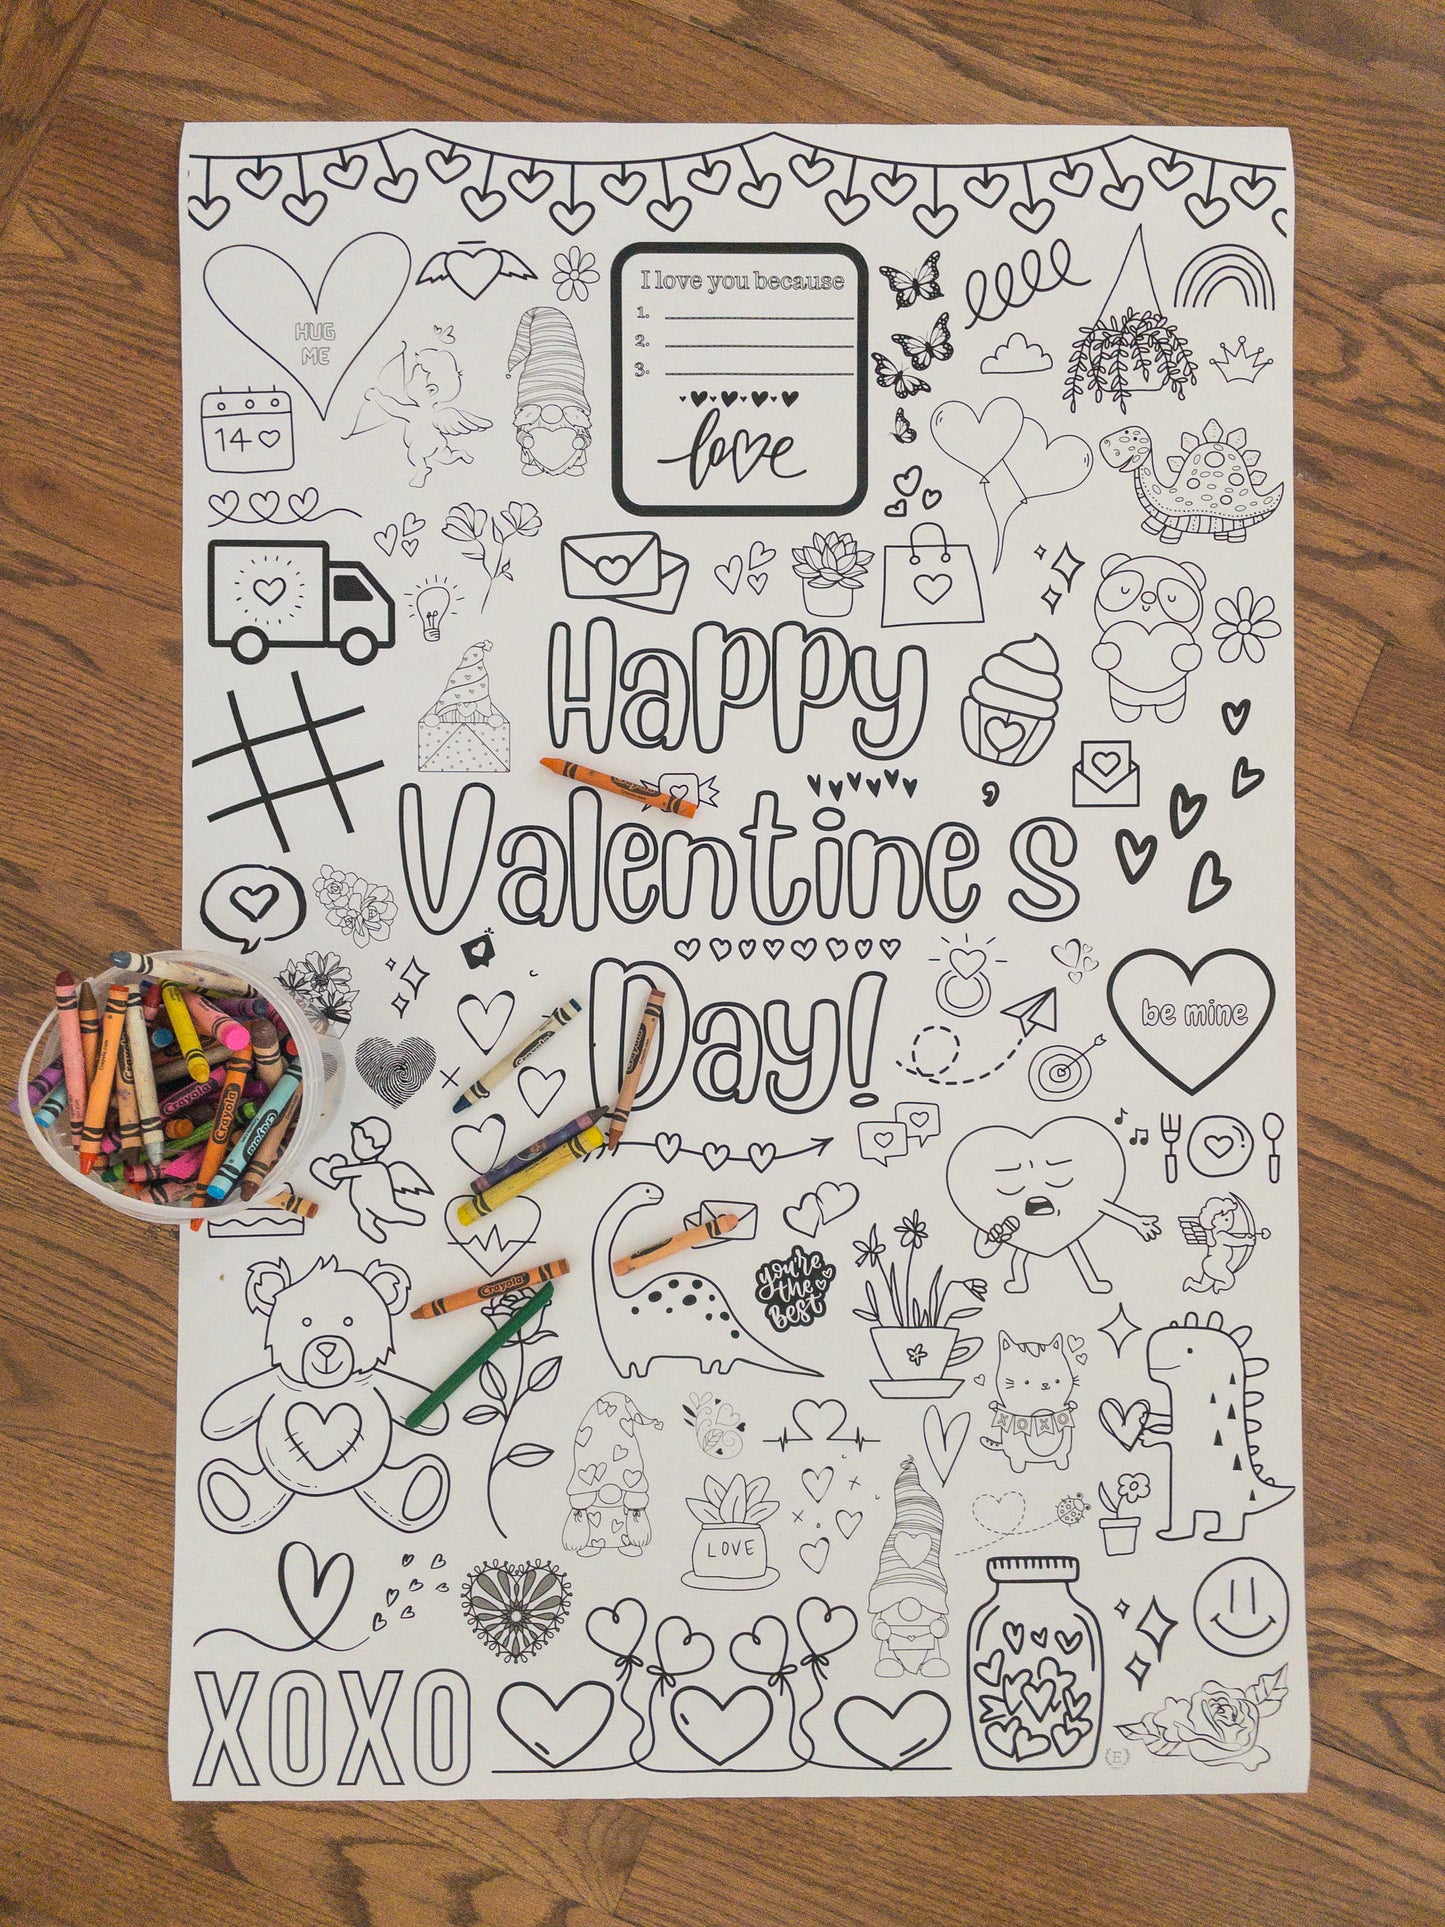 Happy Valentine's Day Coloring Poster | 24x36"